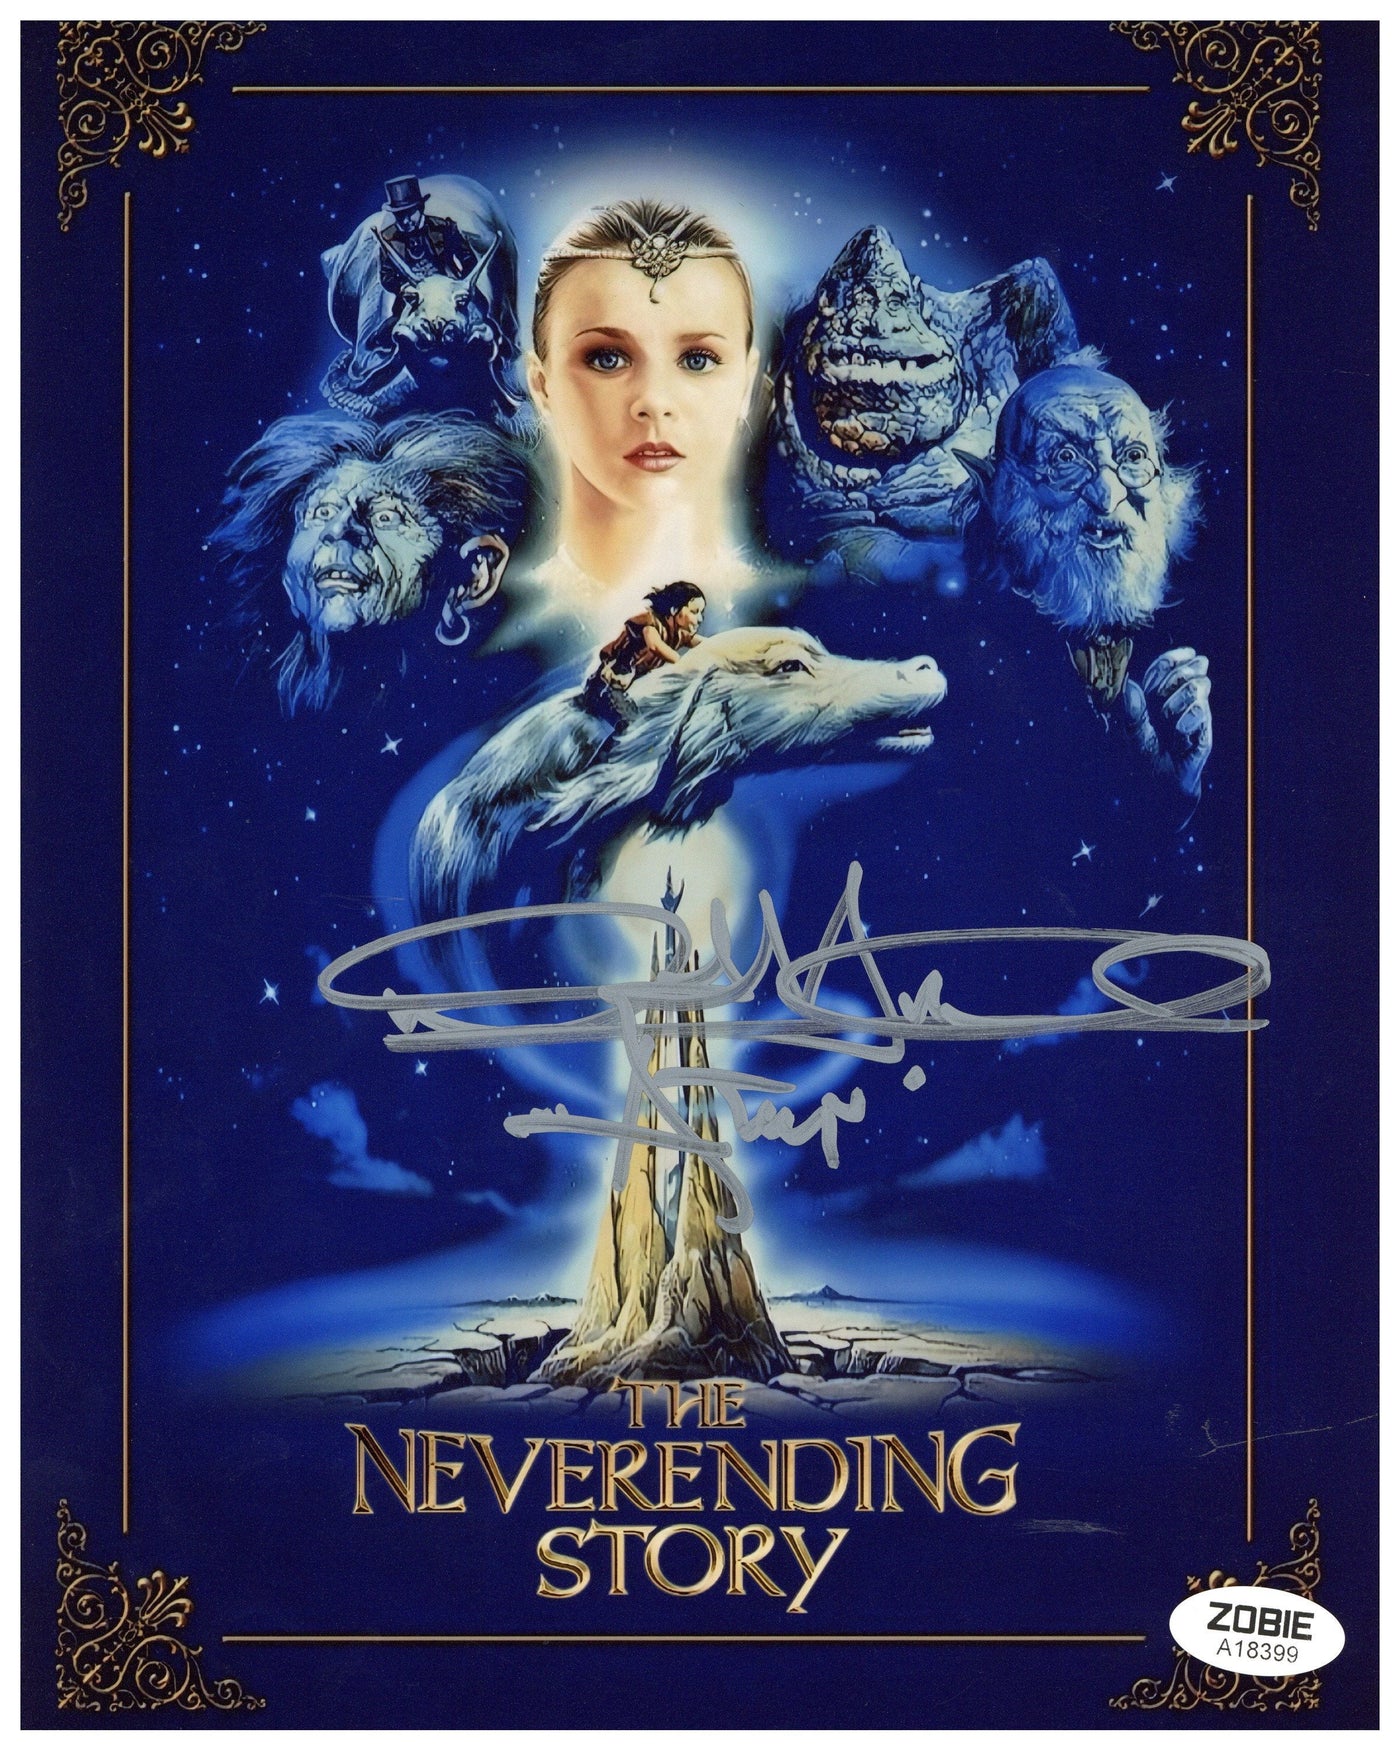 Noah Hathaway Signed 8x10 Photo The NeverEnding Story Autographed Zobie COA #2